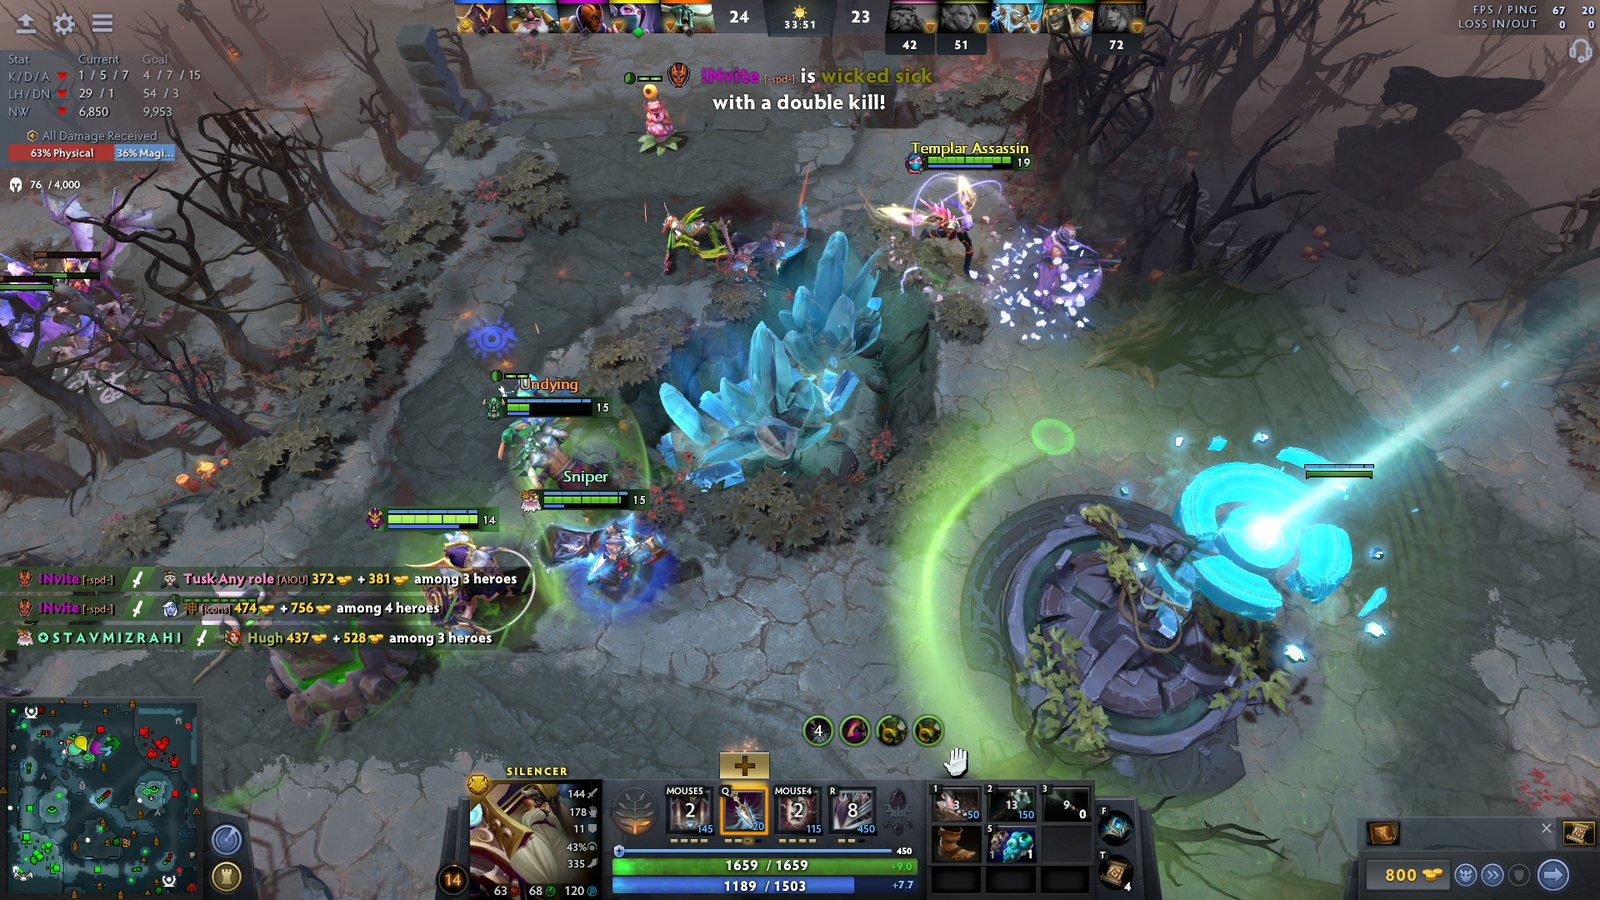 Valve puts its foot down on smurfing, banning 90k Dota 2 accounts